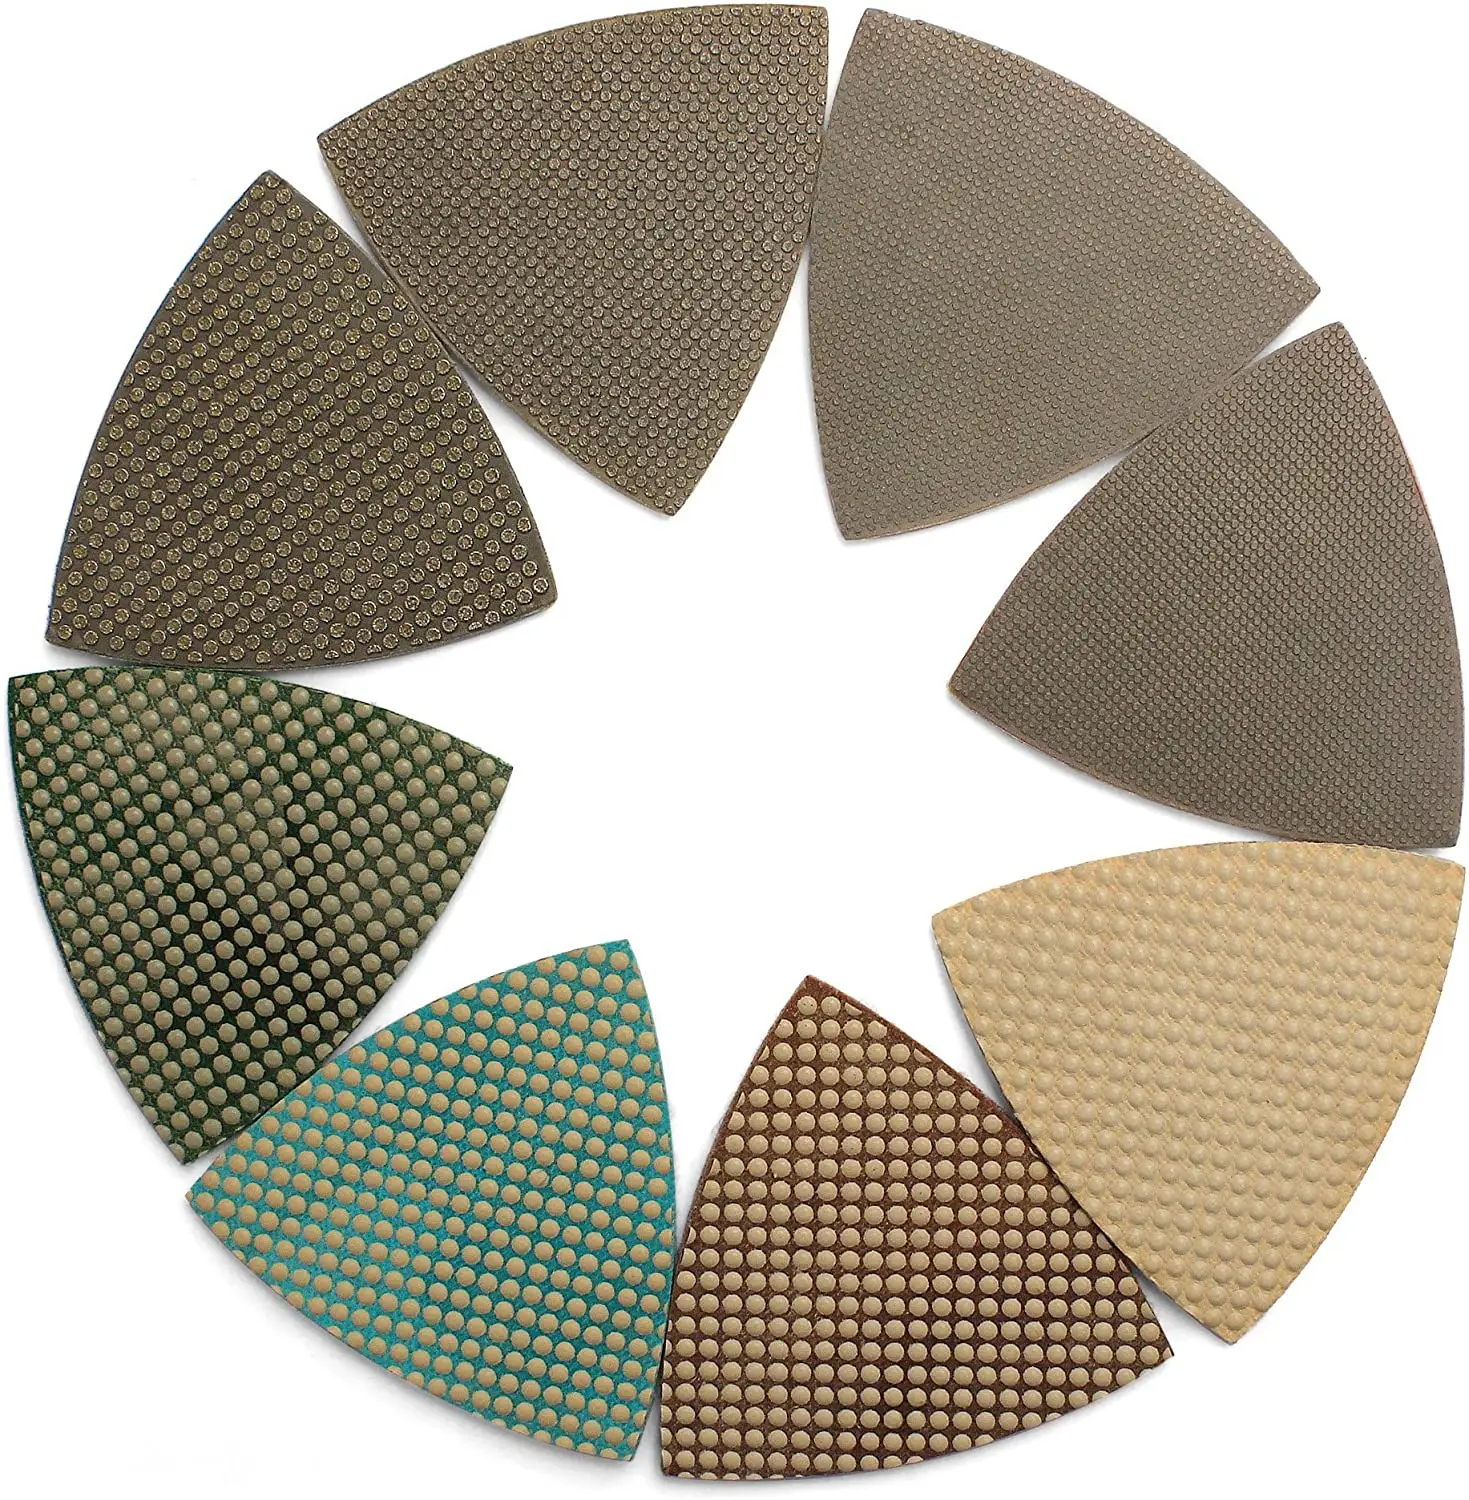 China Manufacturer Triangle Sandpaper, Diamond Dry Polishing Sanding Pads Sheets for Glass Marble and Concrete Corner